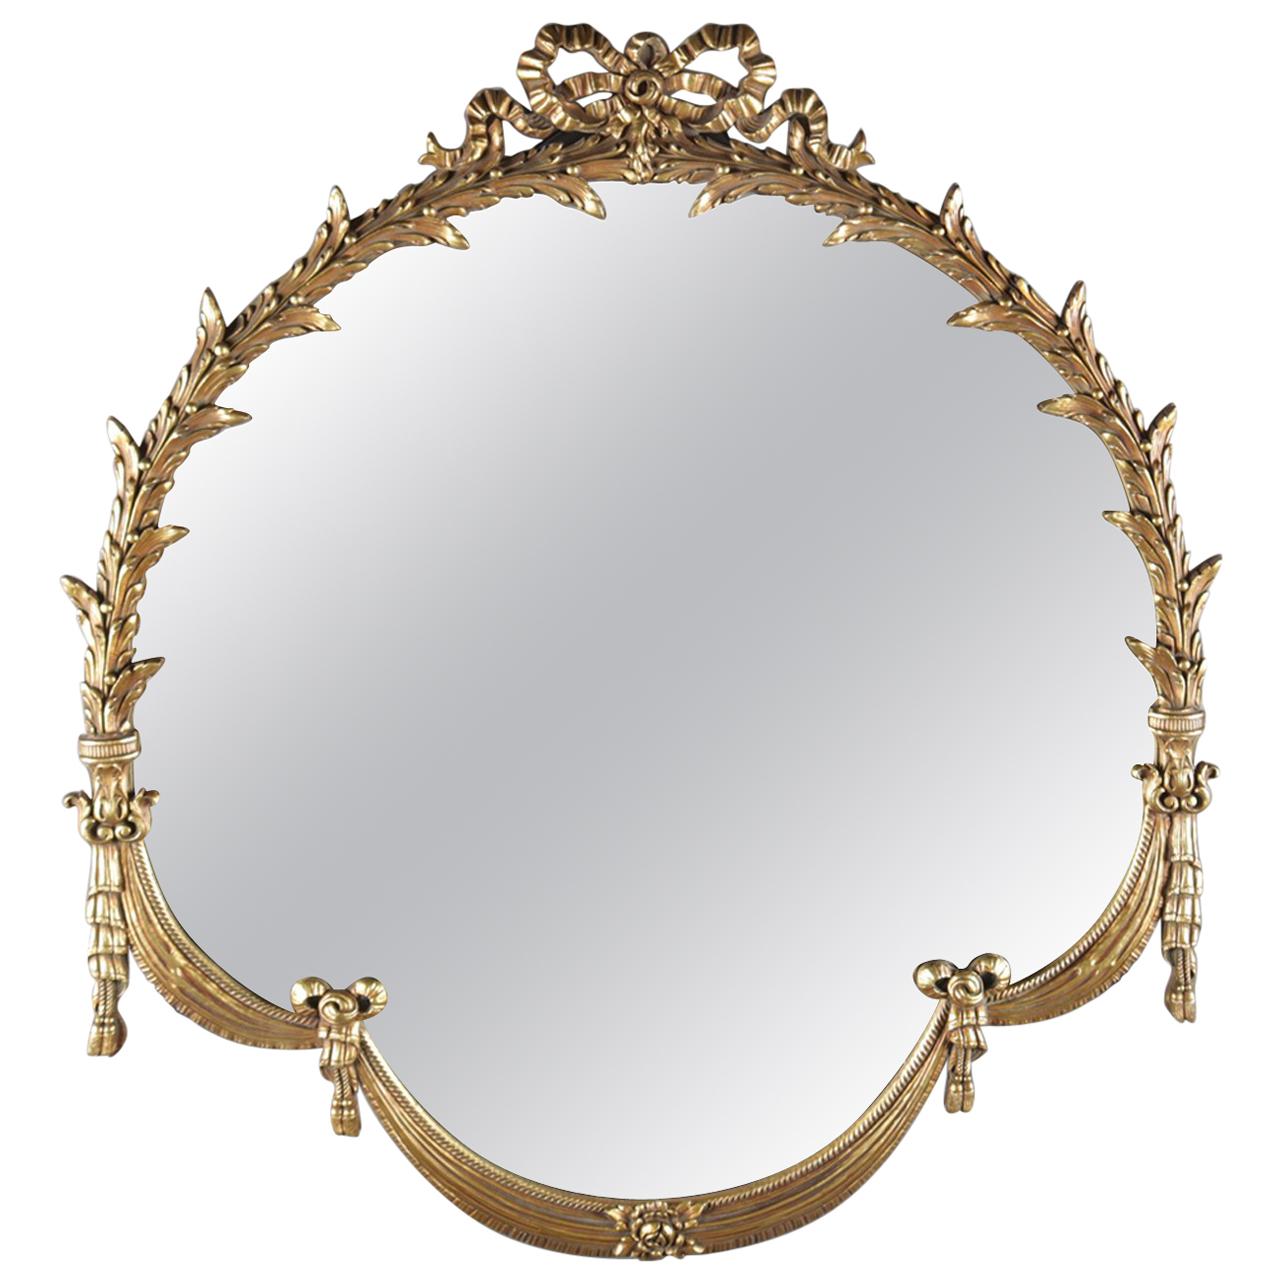 French Louis XV Style Foliate and Drape Giltwood Wall Mirror, 20th Century